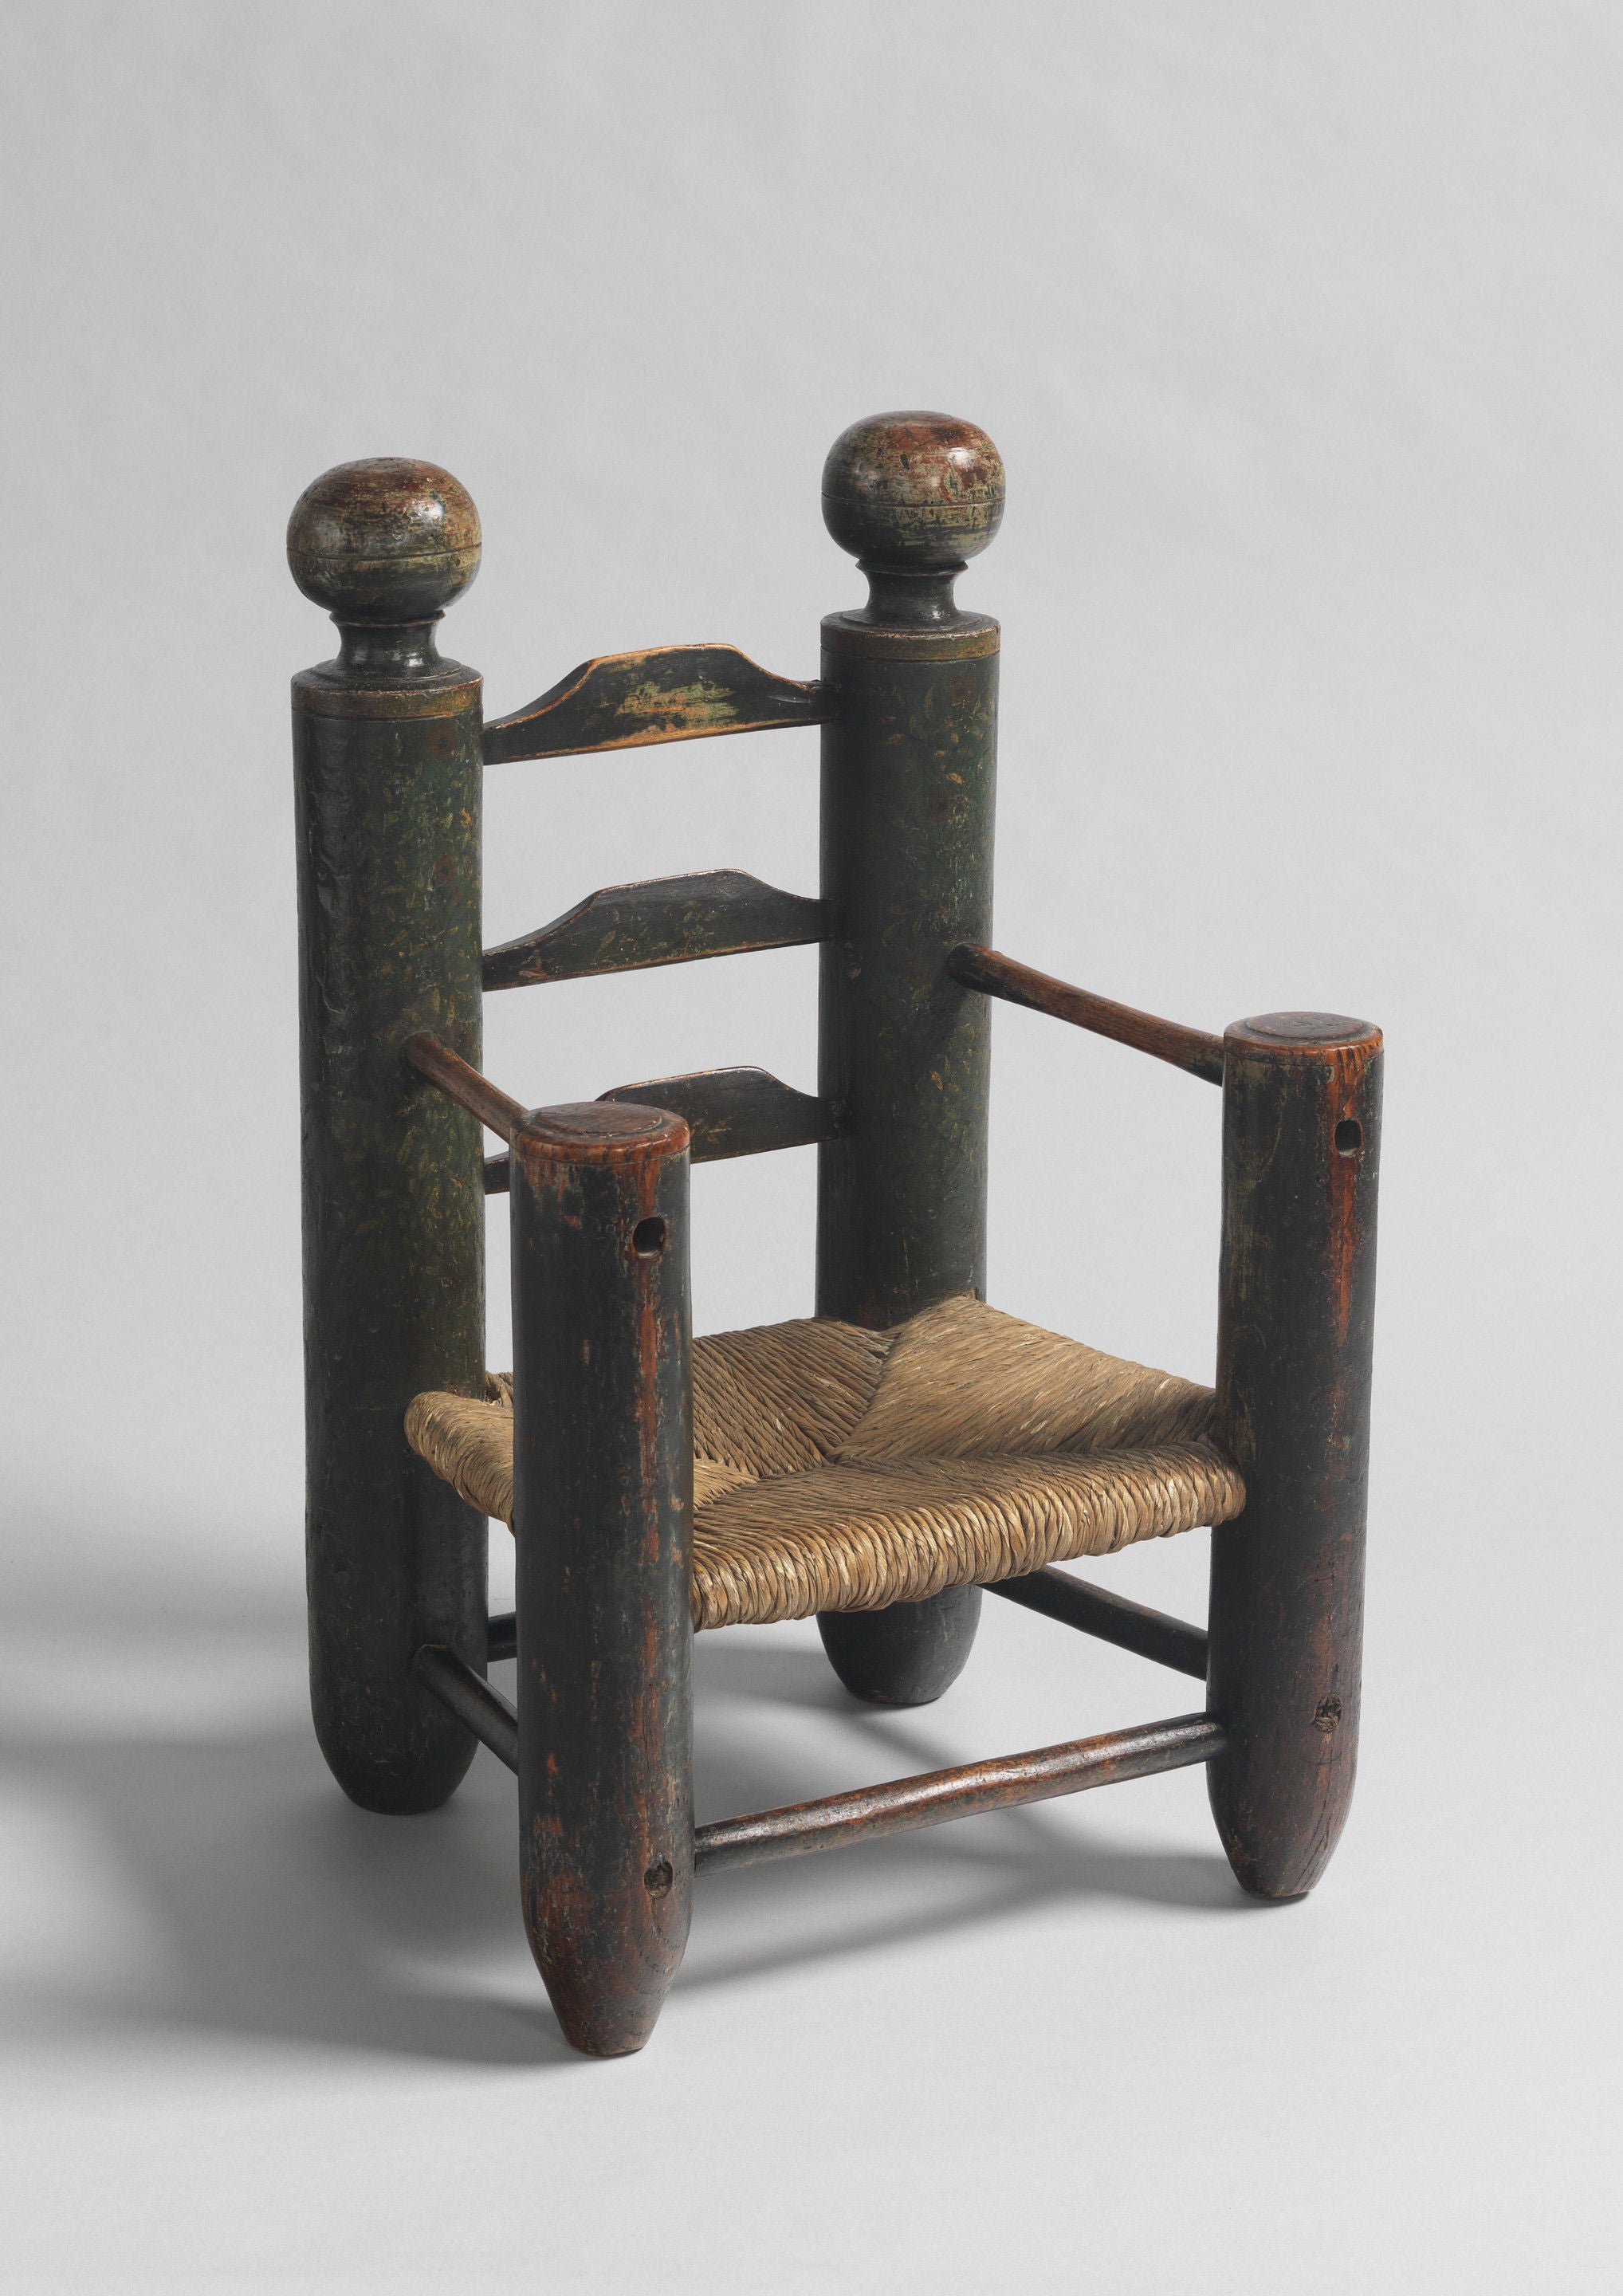 Monumental Early Ladderback Child's Chair